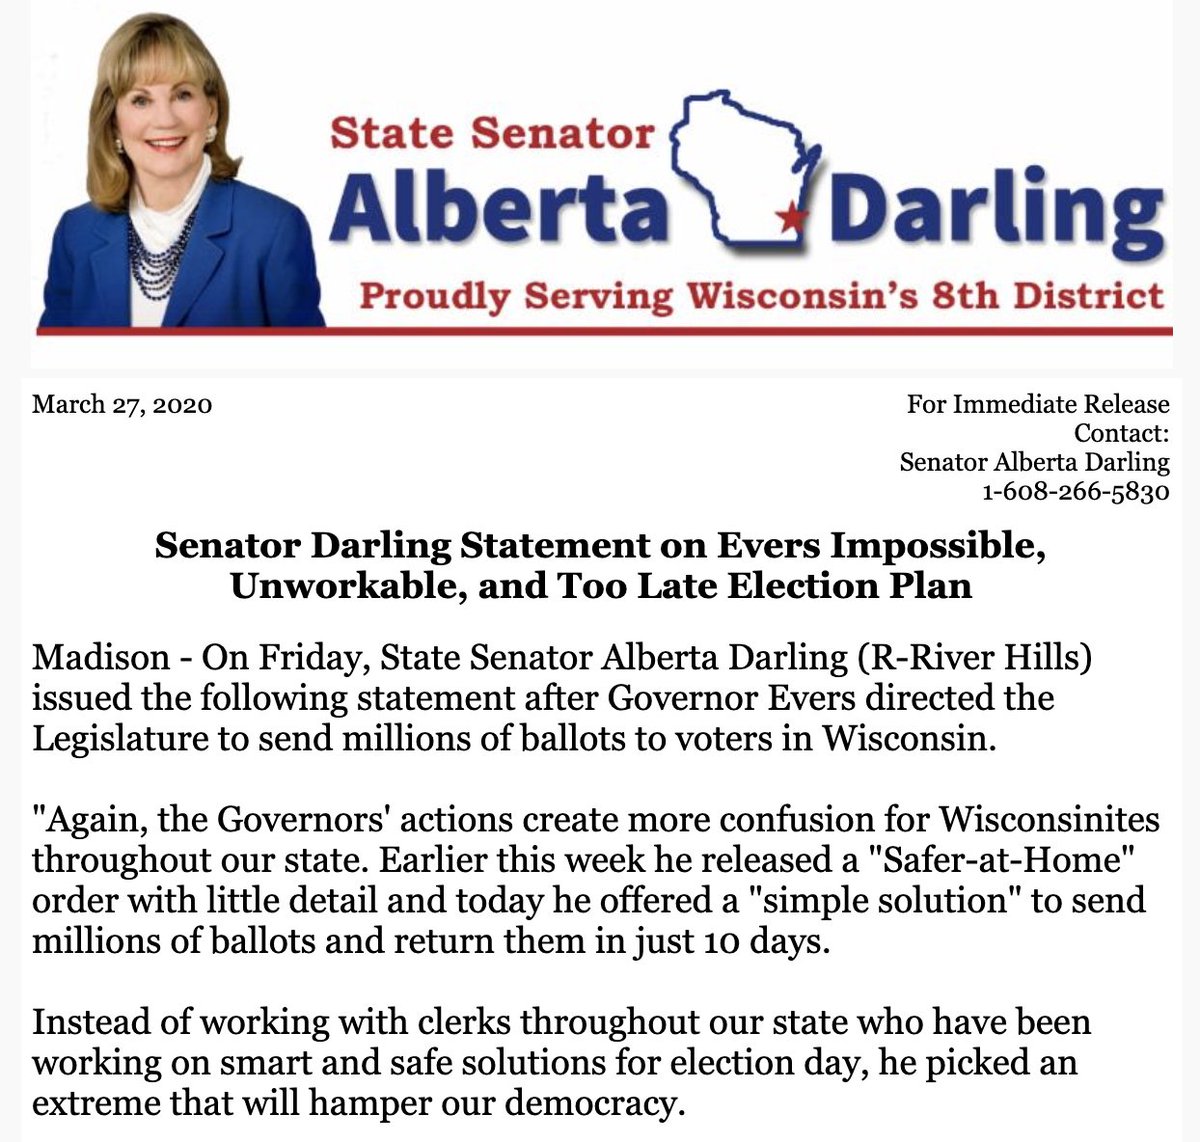 The first of tonight's featured legislators? Meet Alberta Darling! Senator Darling attacked Governor Evers's proposal to mail ballots to Wisconsinites as "an extreme that will hamper our democracy."Why? Too little time. So, delay to make it work? No!  https://myemail.constantcontact.com/Governor-s-Plan-Unworkable--Impossible--and-Too-Late.html?soid=1107630230756&aid=MiTukg4wVf4